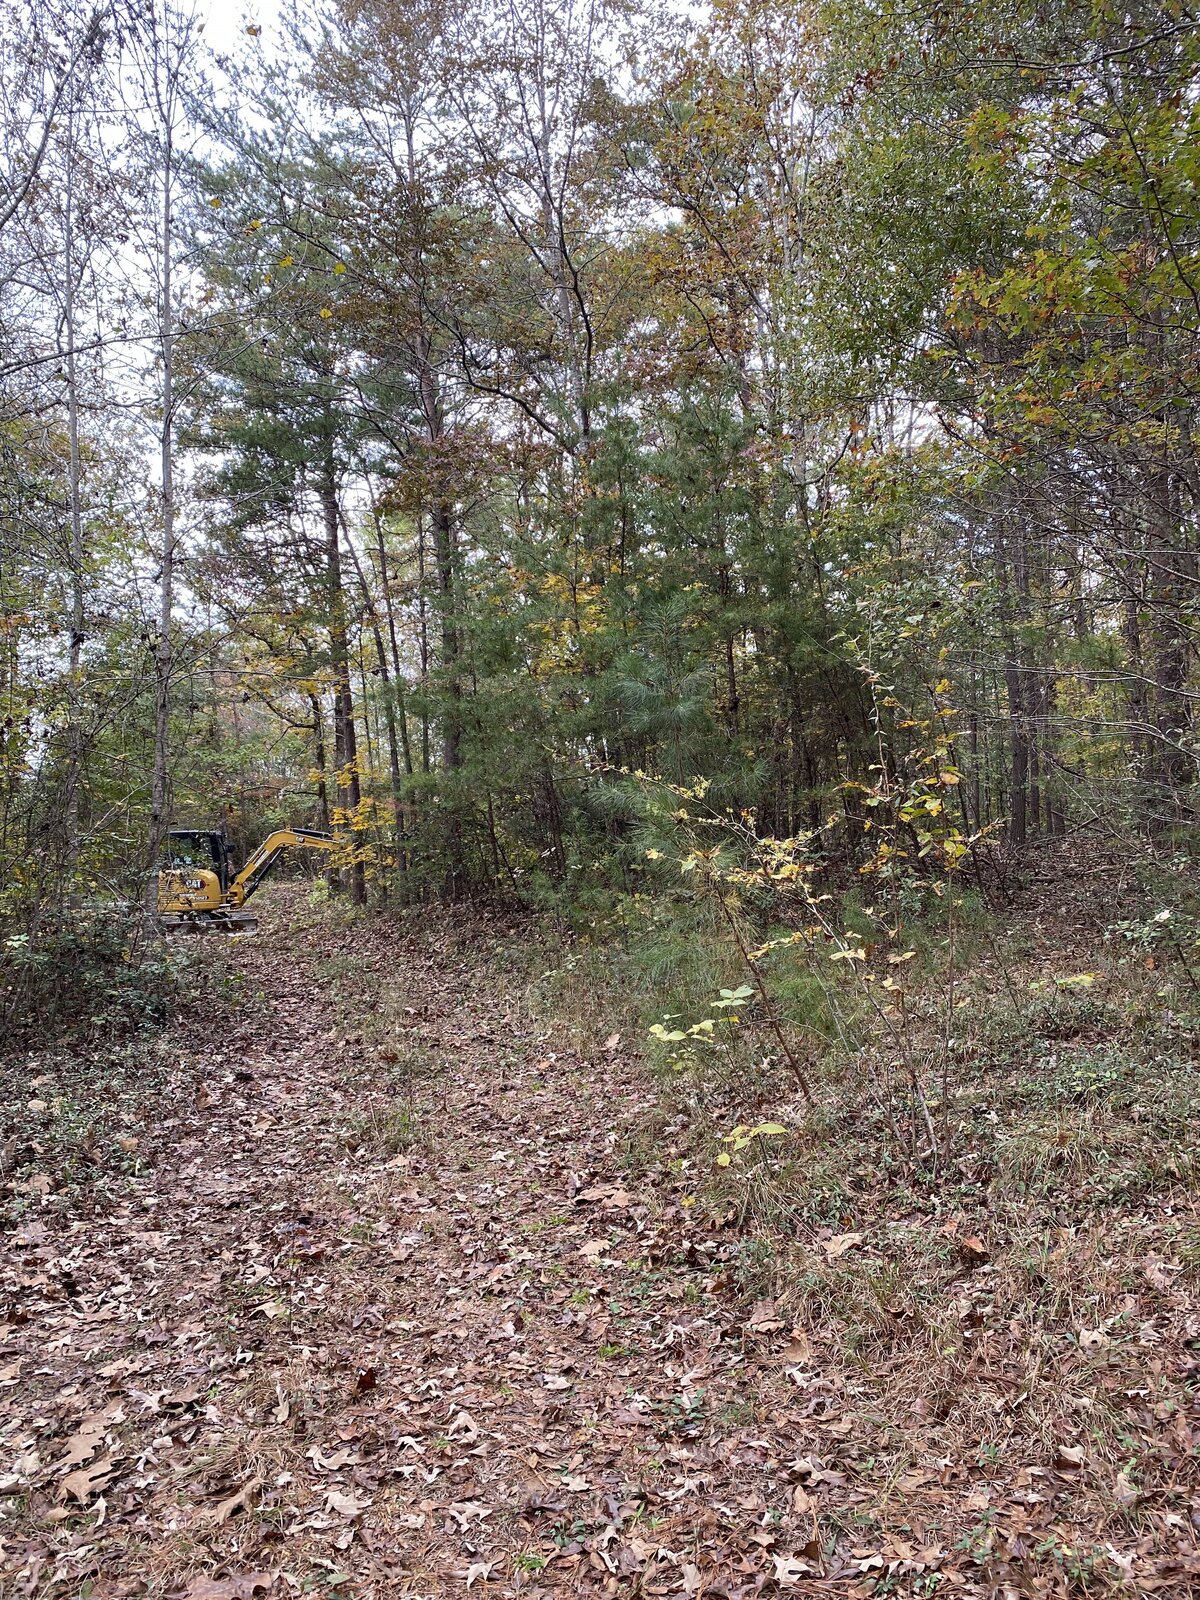 excavator-clearing-path-in-woods-during-fall